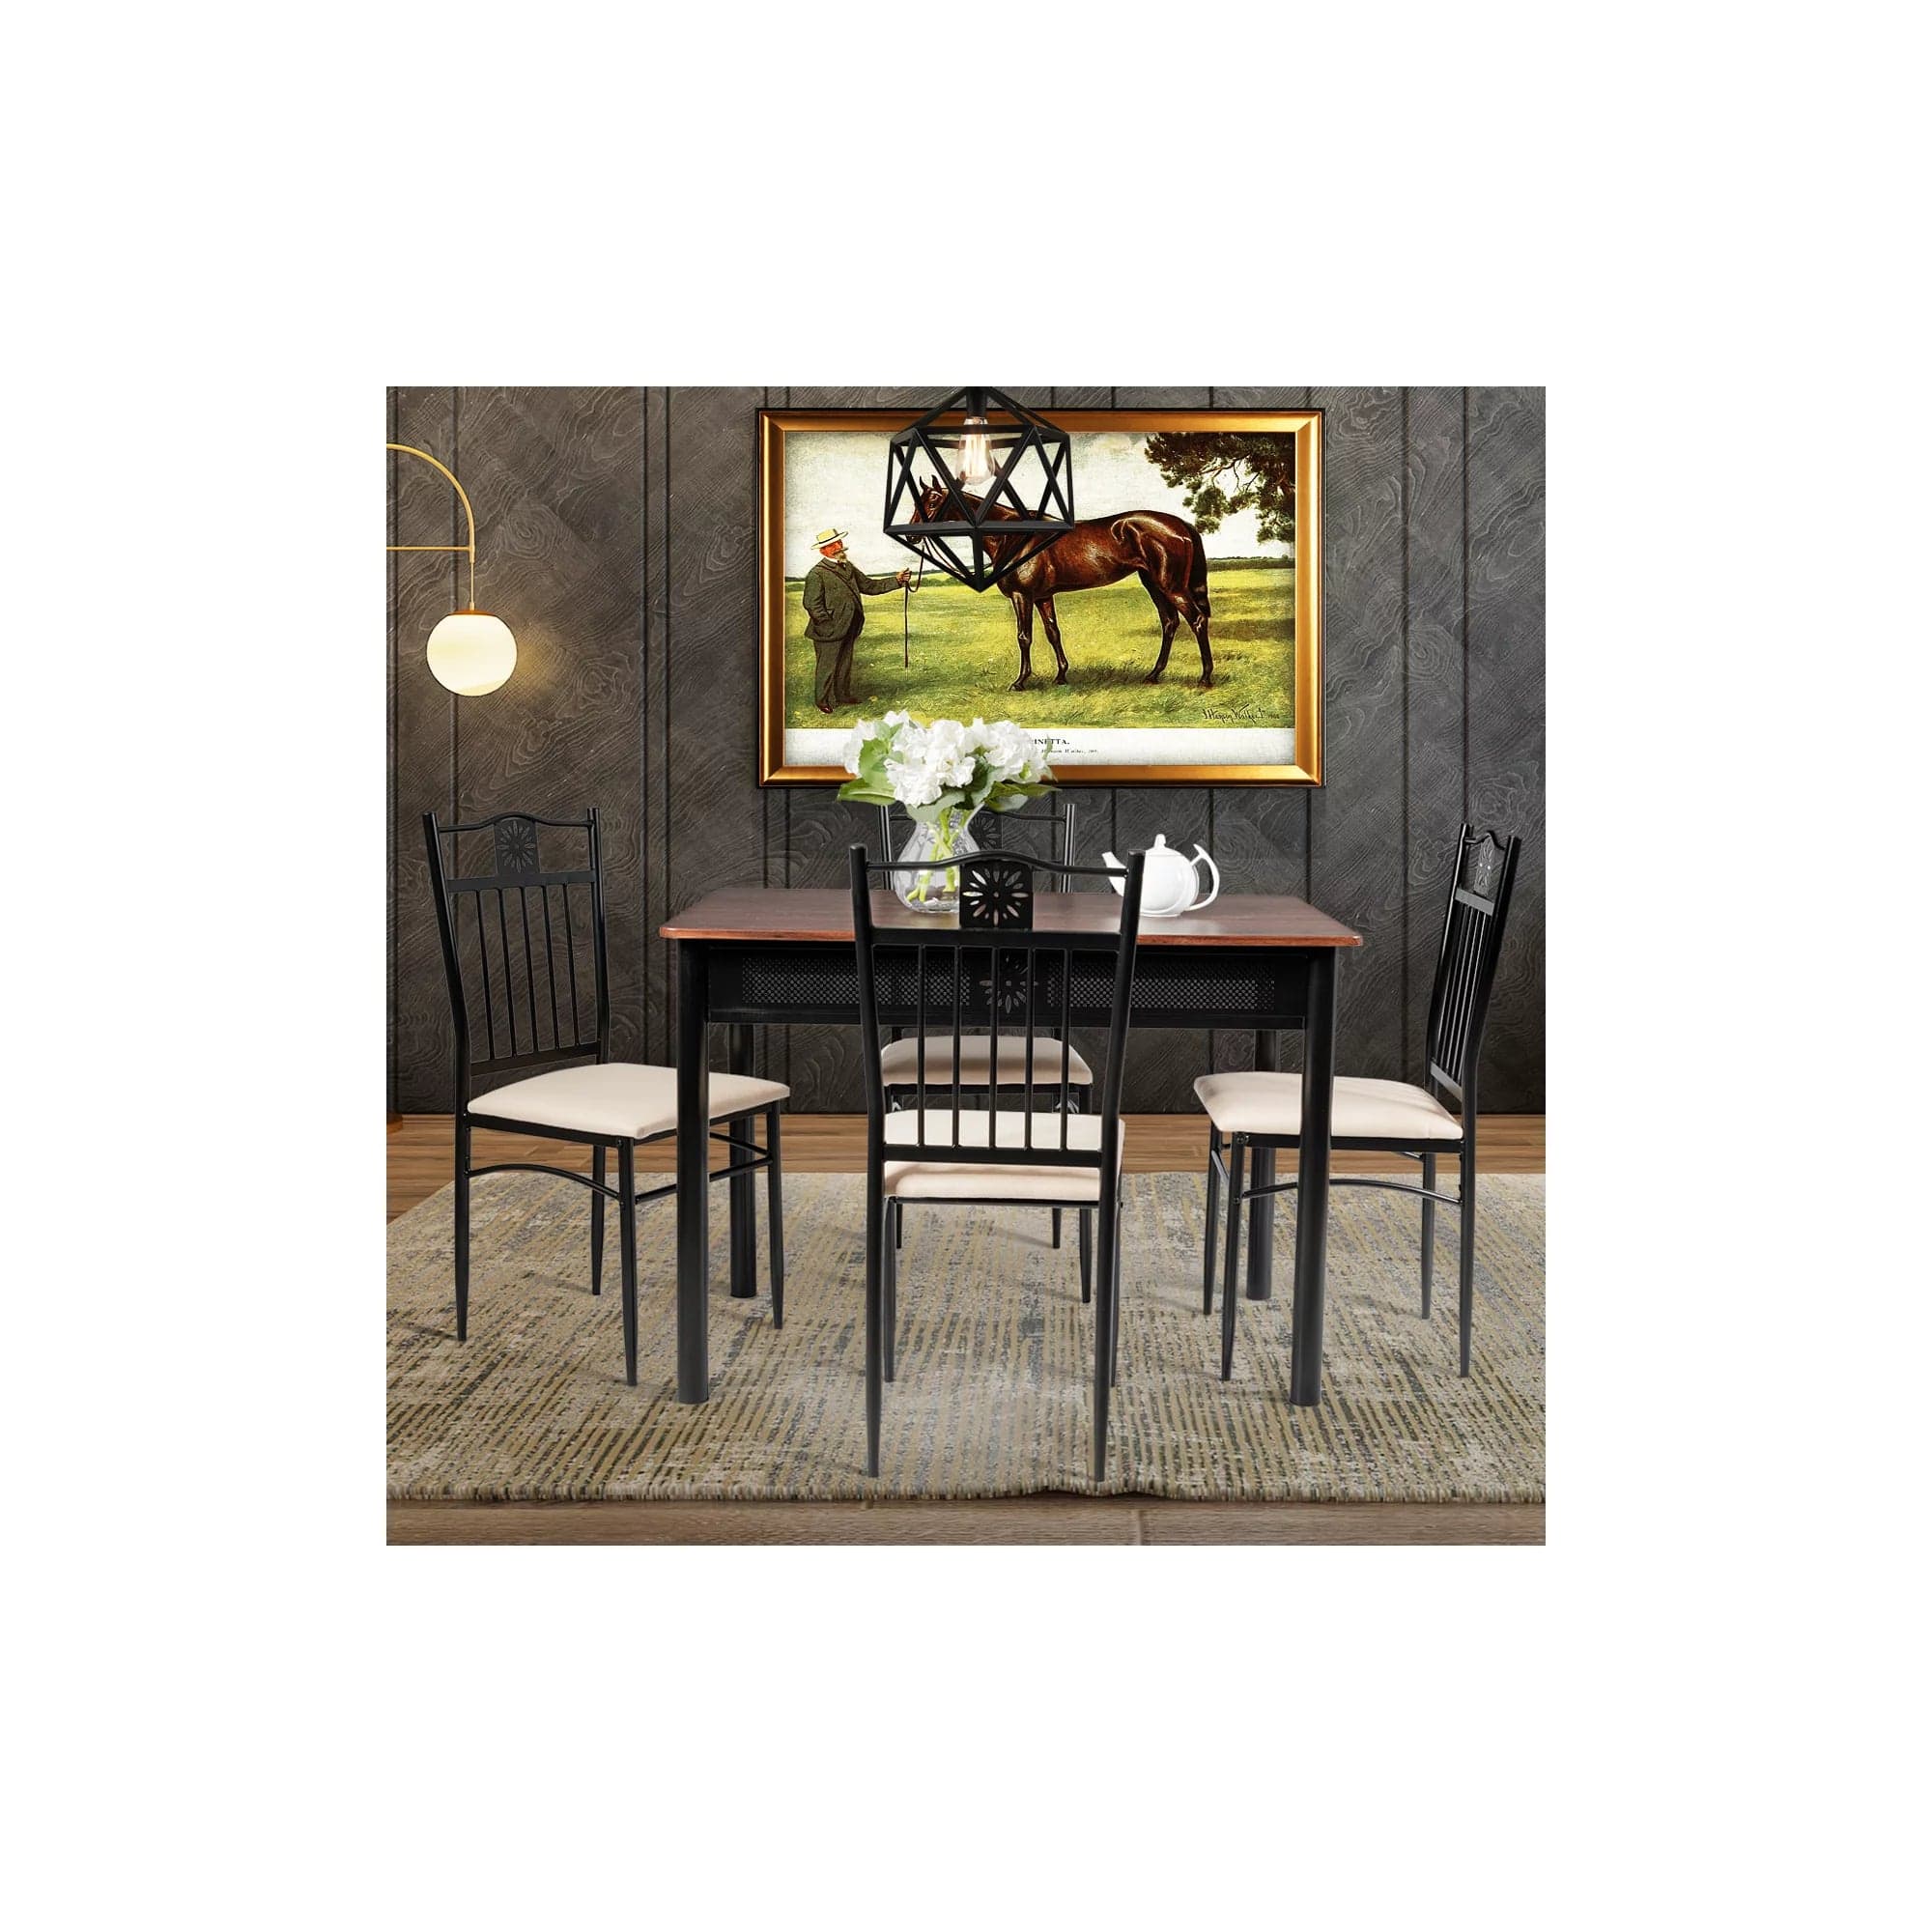 Topbuy 5 Piece Dining Set Wood Metal Table and Chairs Kitchen Furniture